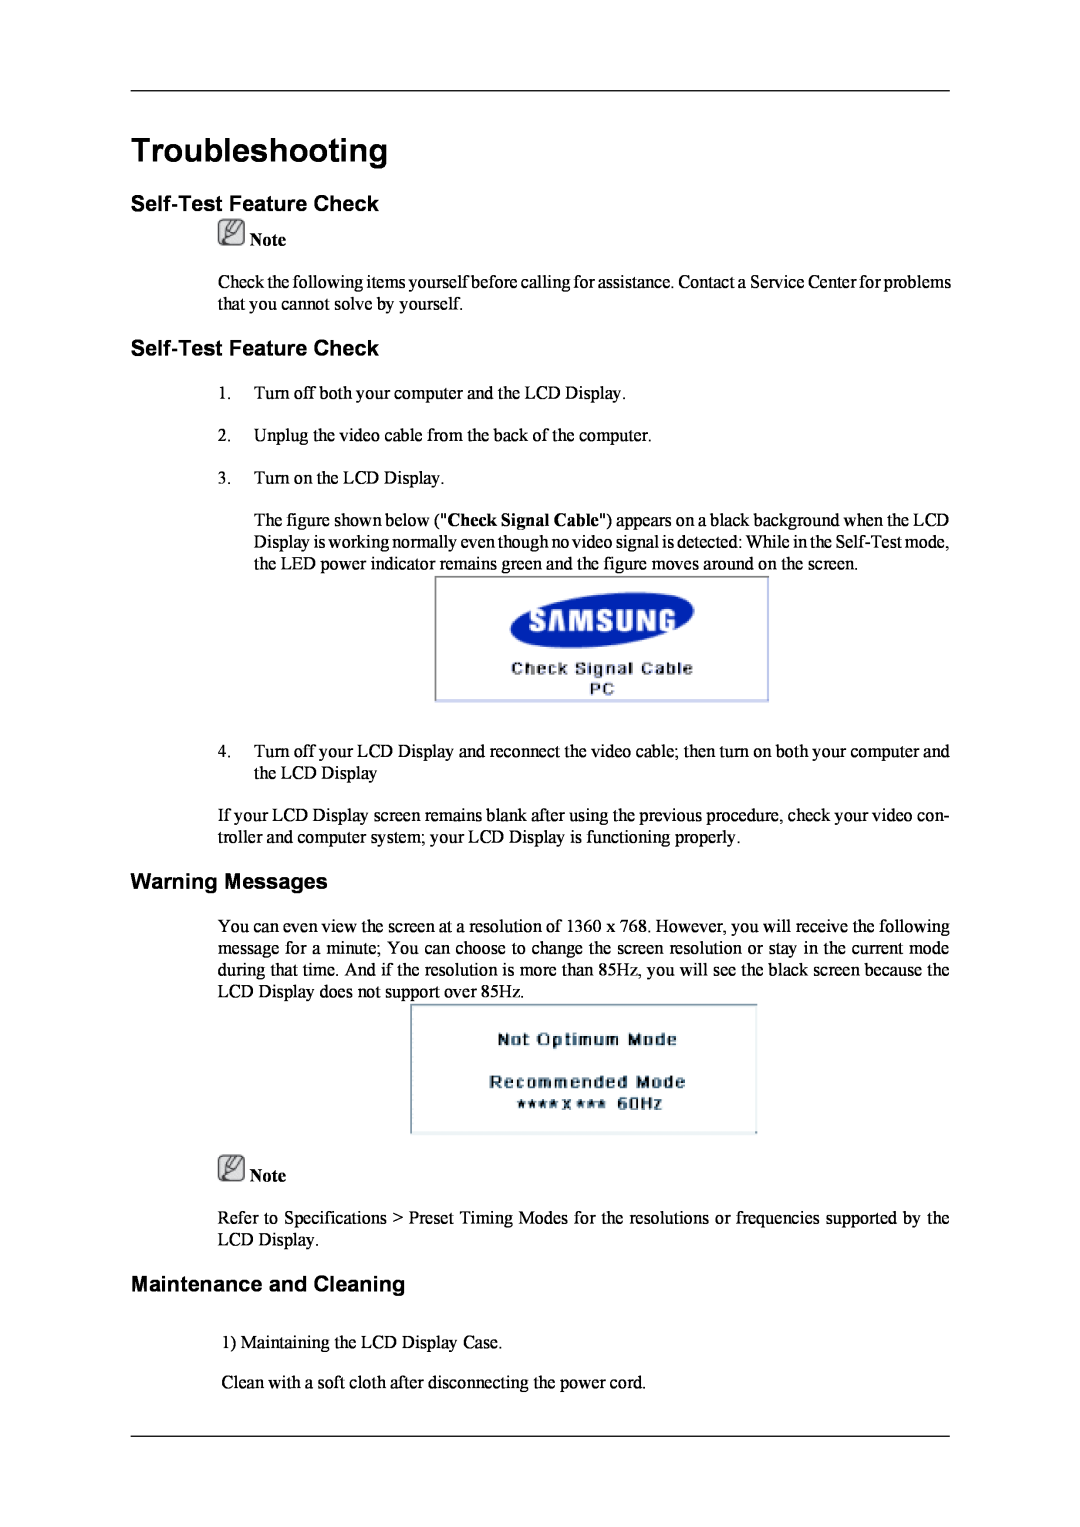 Samsung 400UXn user manual Troubleshooting, Self-Test Feature Check, Warning Messages, Maintenance and Cleaning 